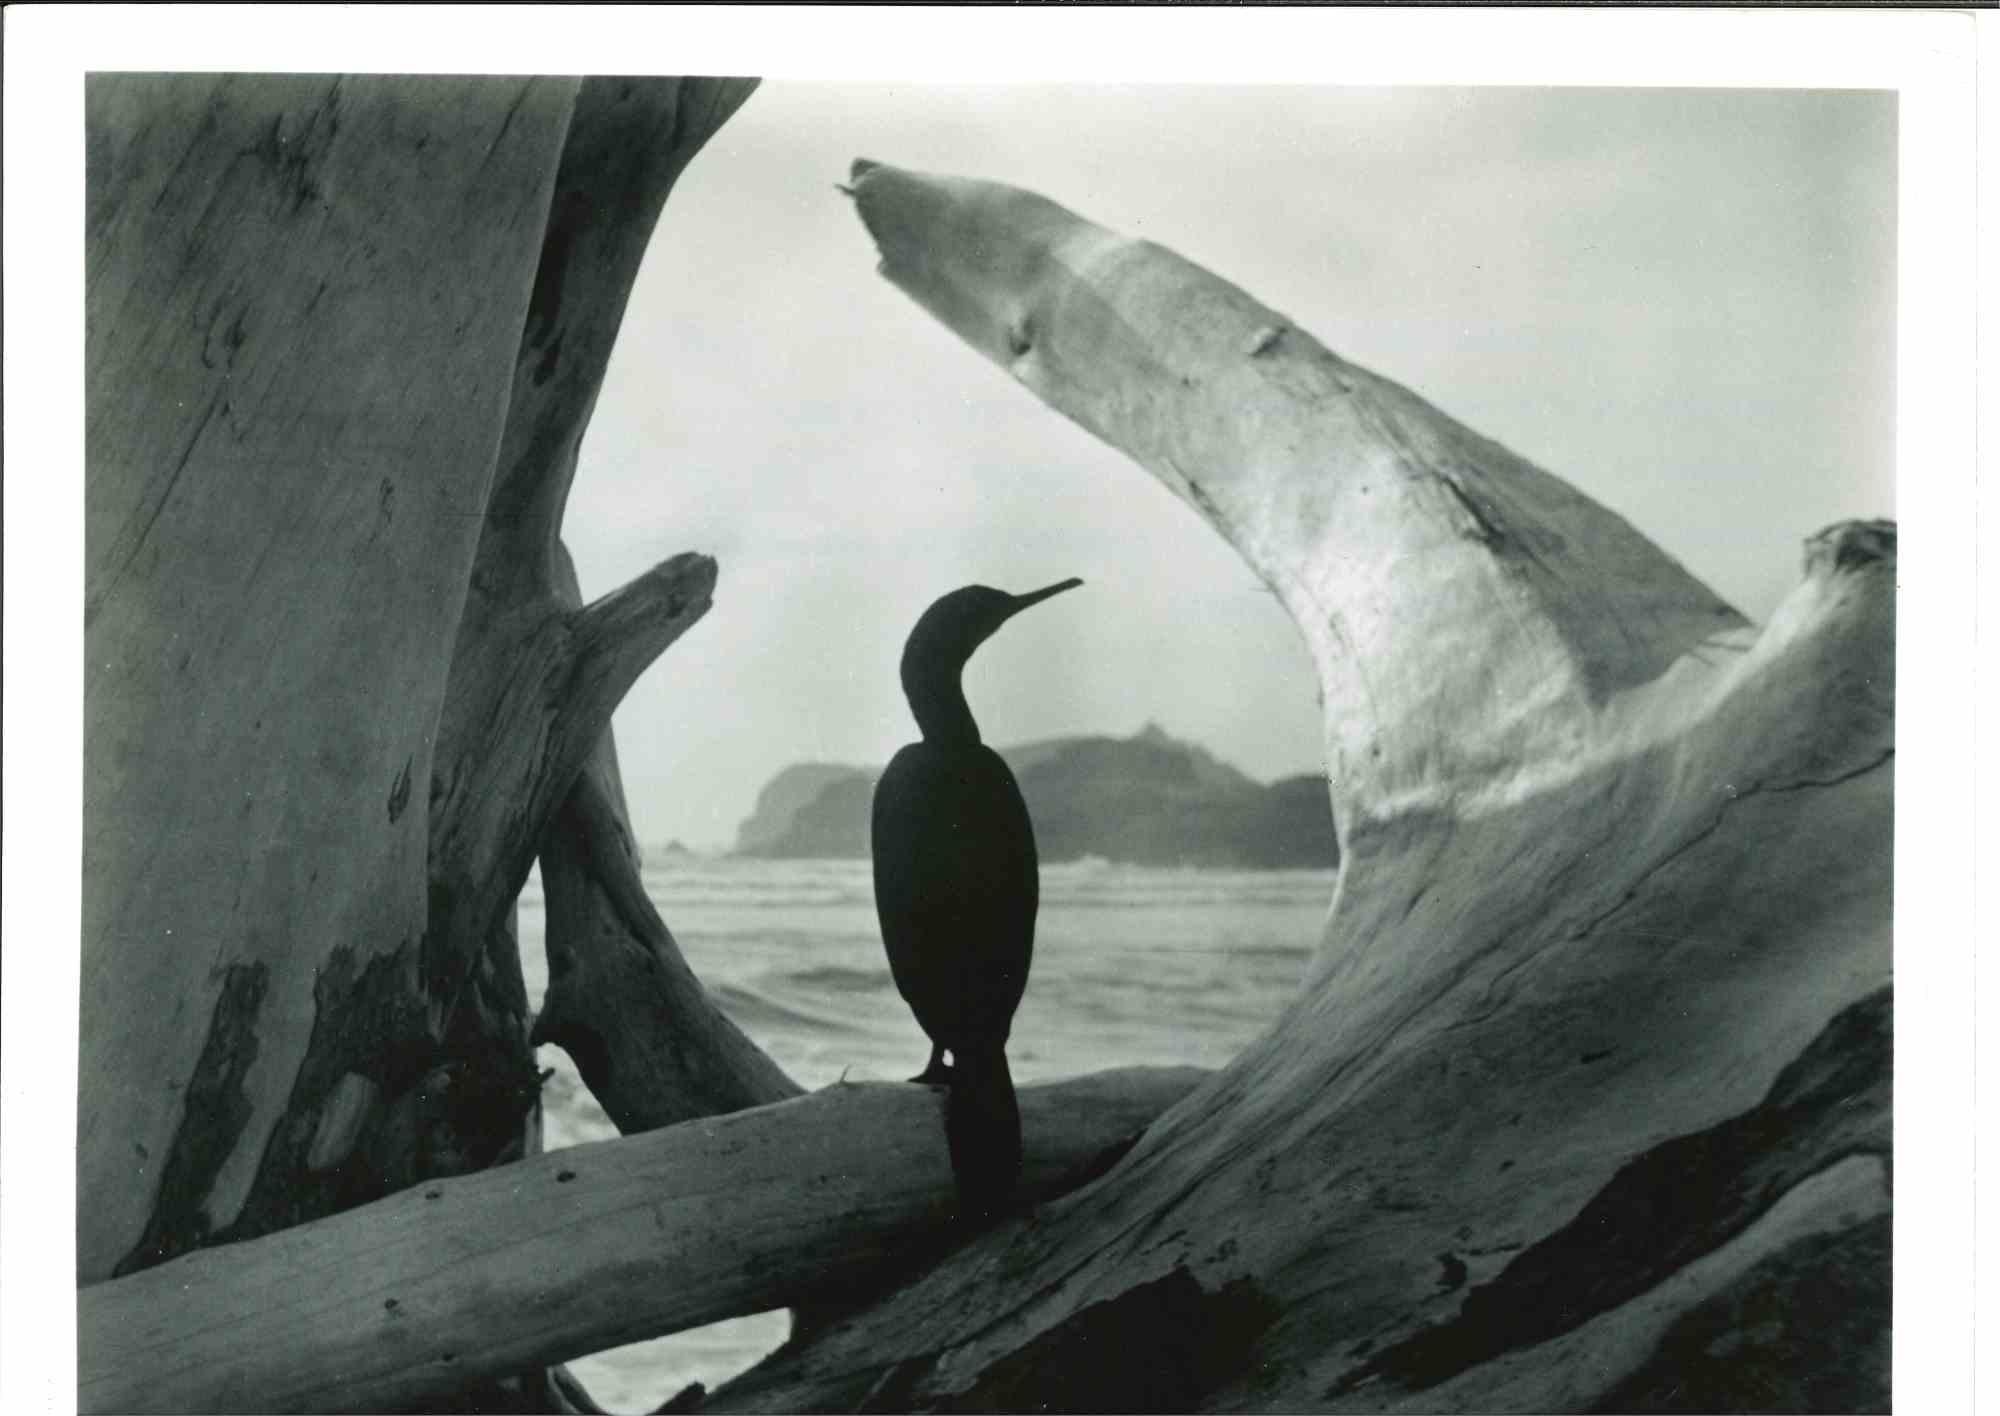 Unknown Figurative Photograph - Driftwood - American Vintage Photograph - Mid 20th Century